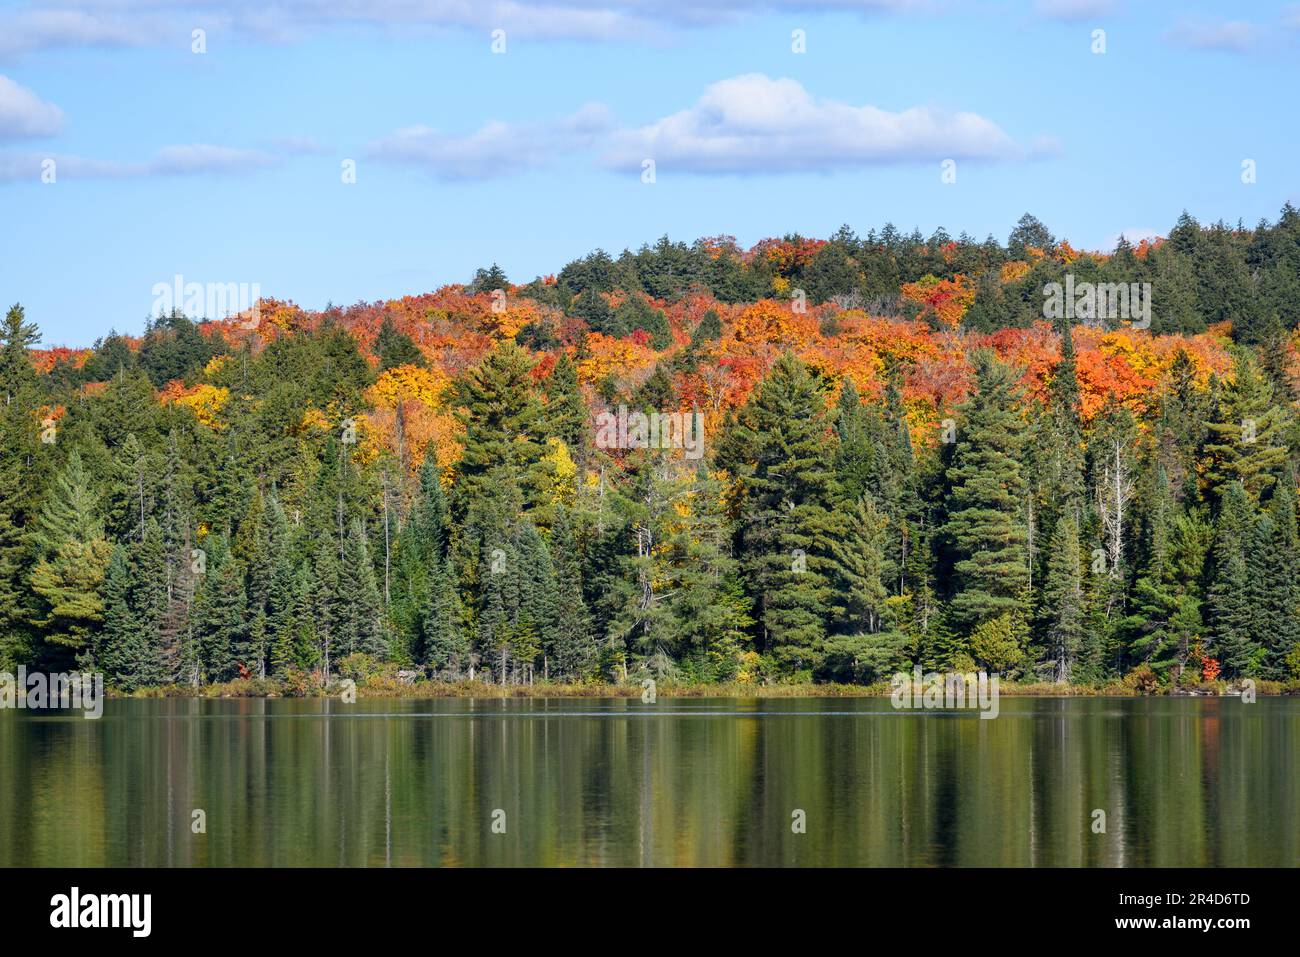 Colourful deciduous trees at the peak of fall foliage among evergreen ones on the shore of a lake on a sunny autumn day. Reflection in water. Stock Photo